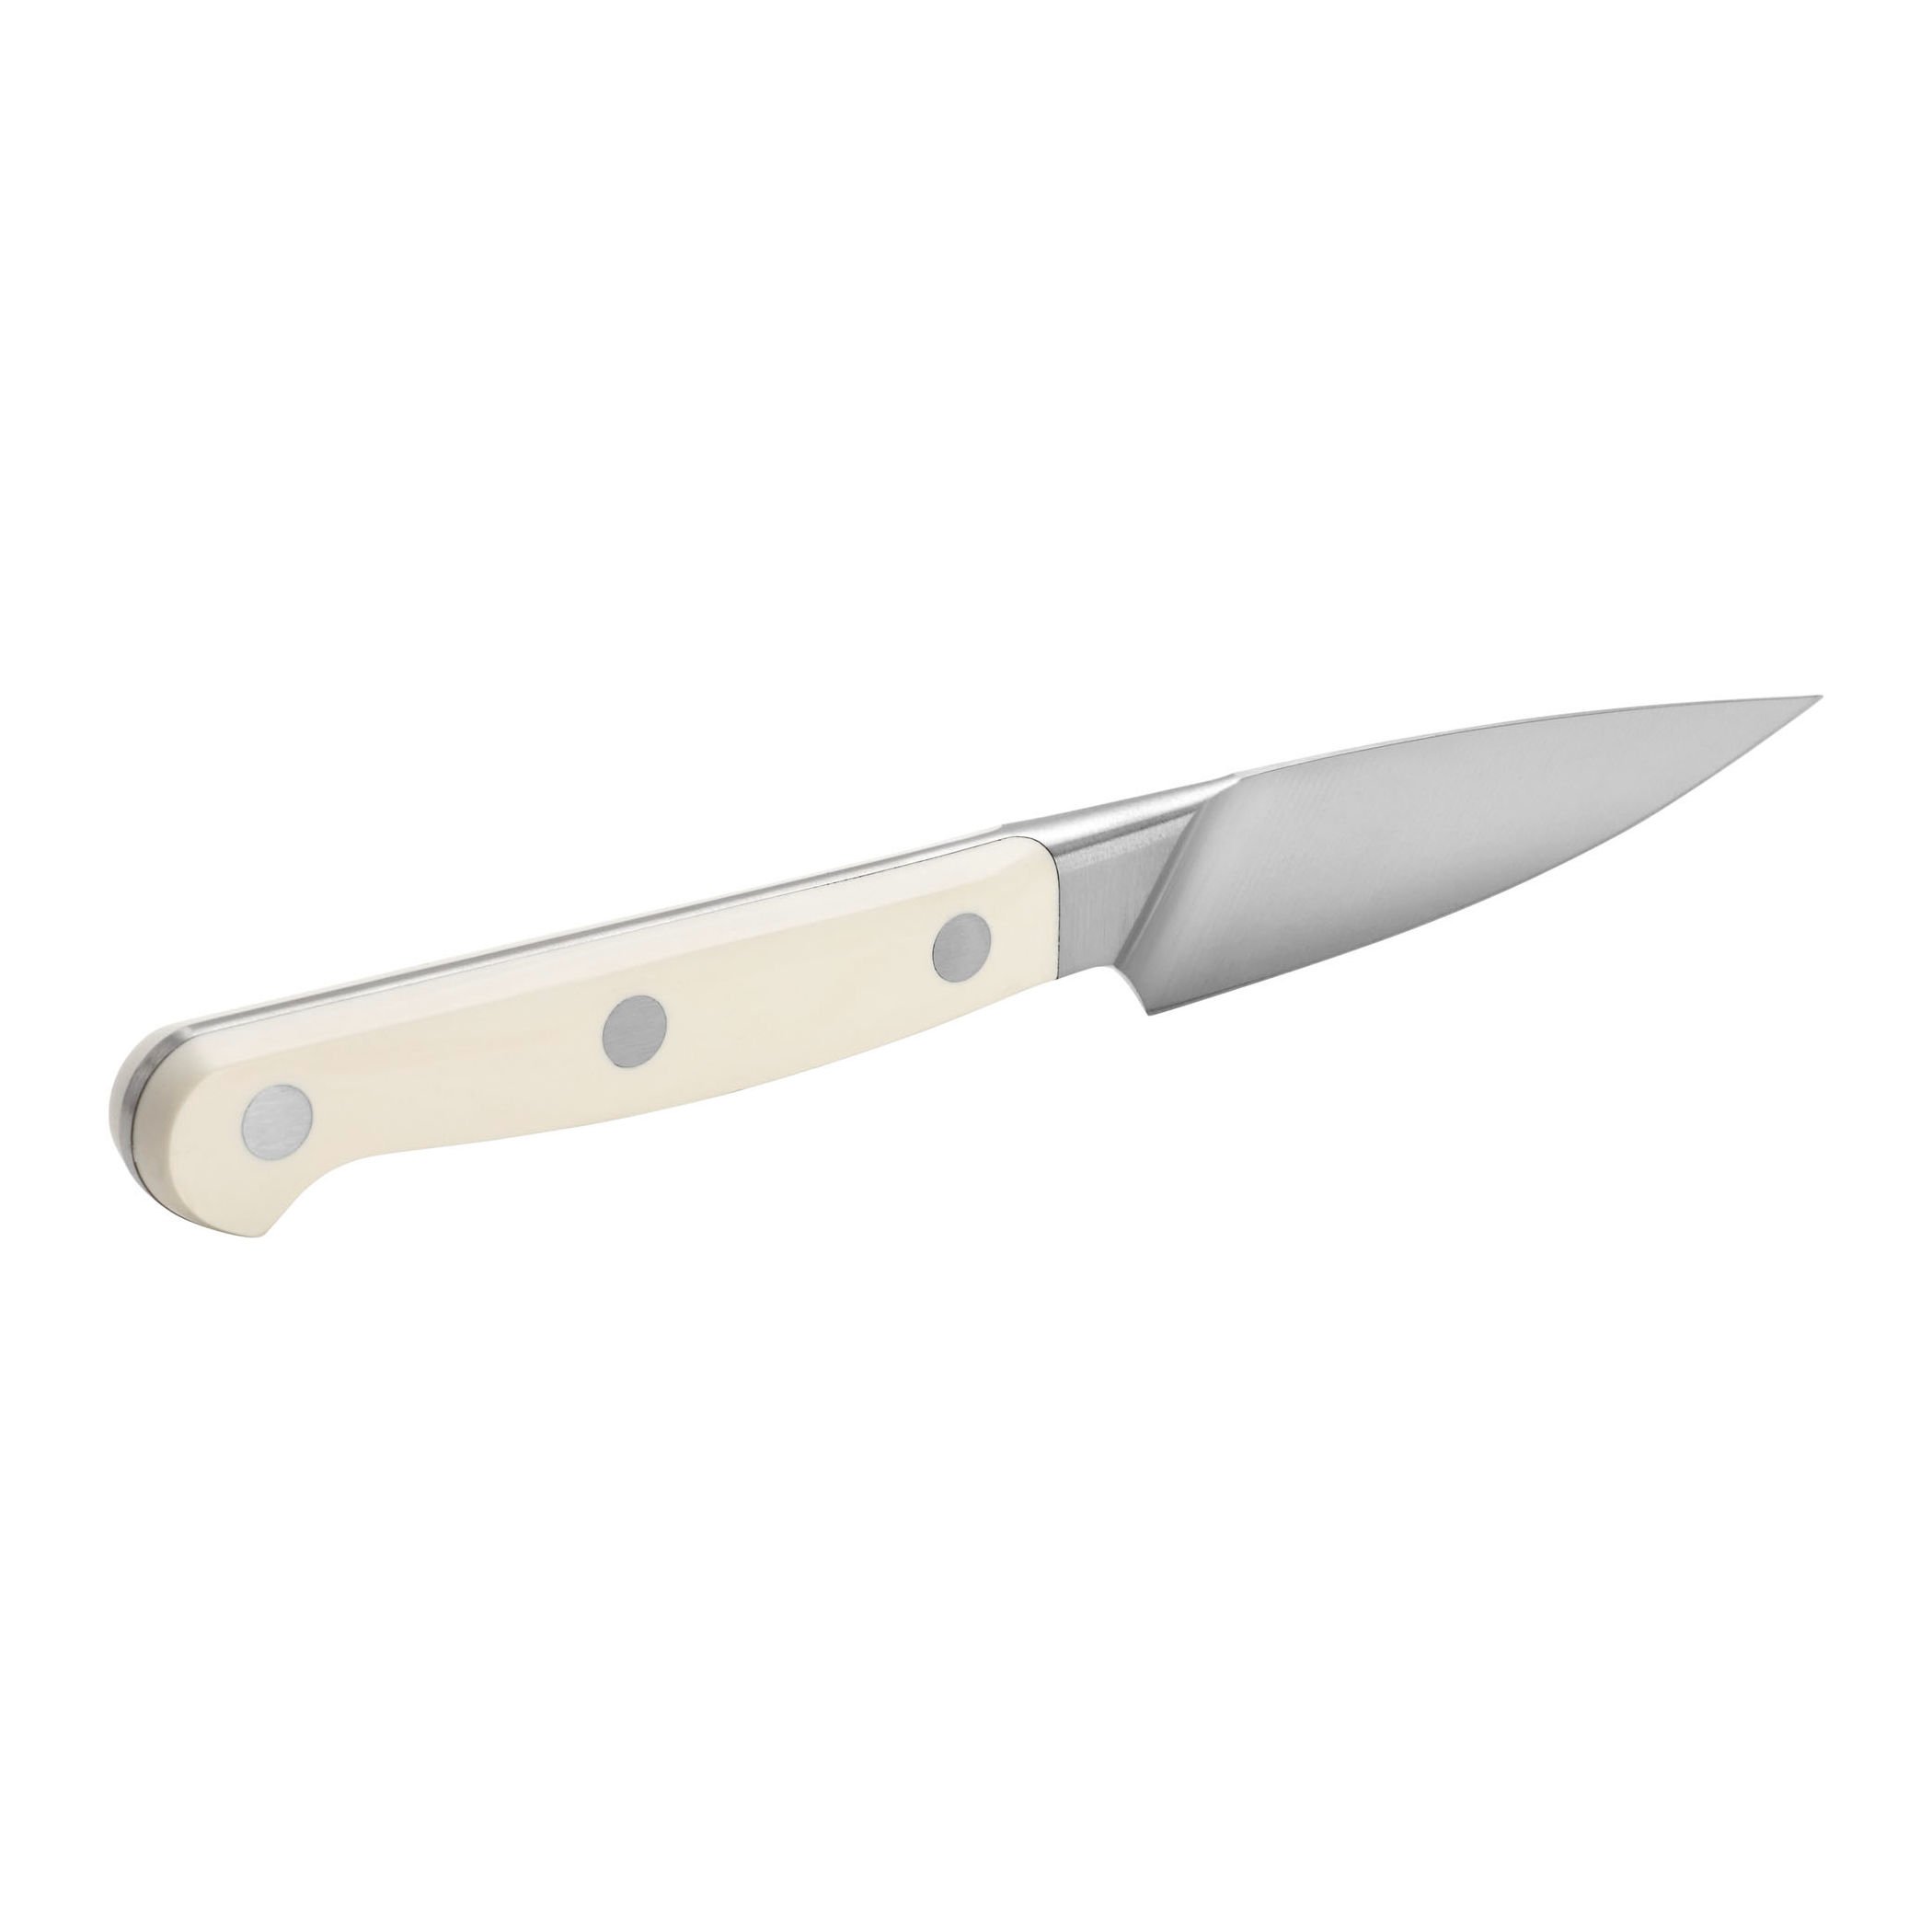 ZWILLING Pro 4-inch Paring Knife 